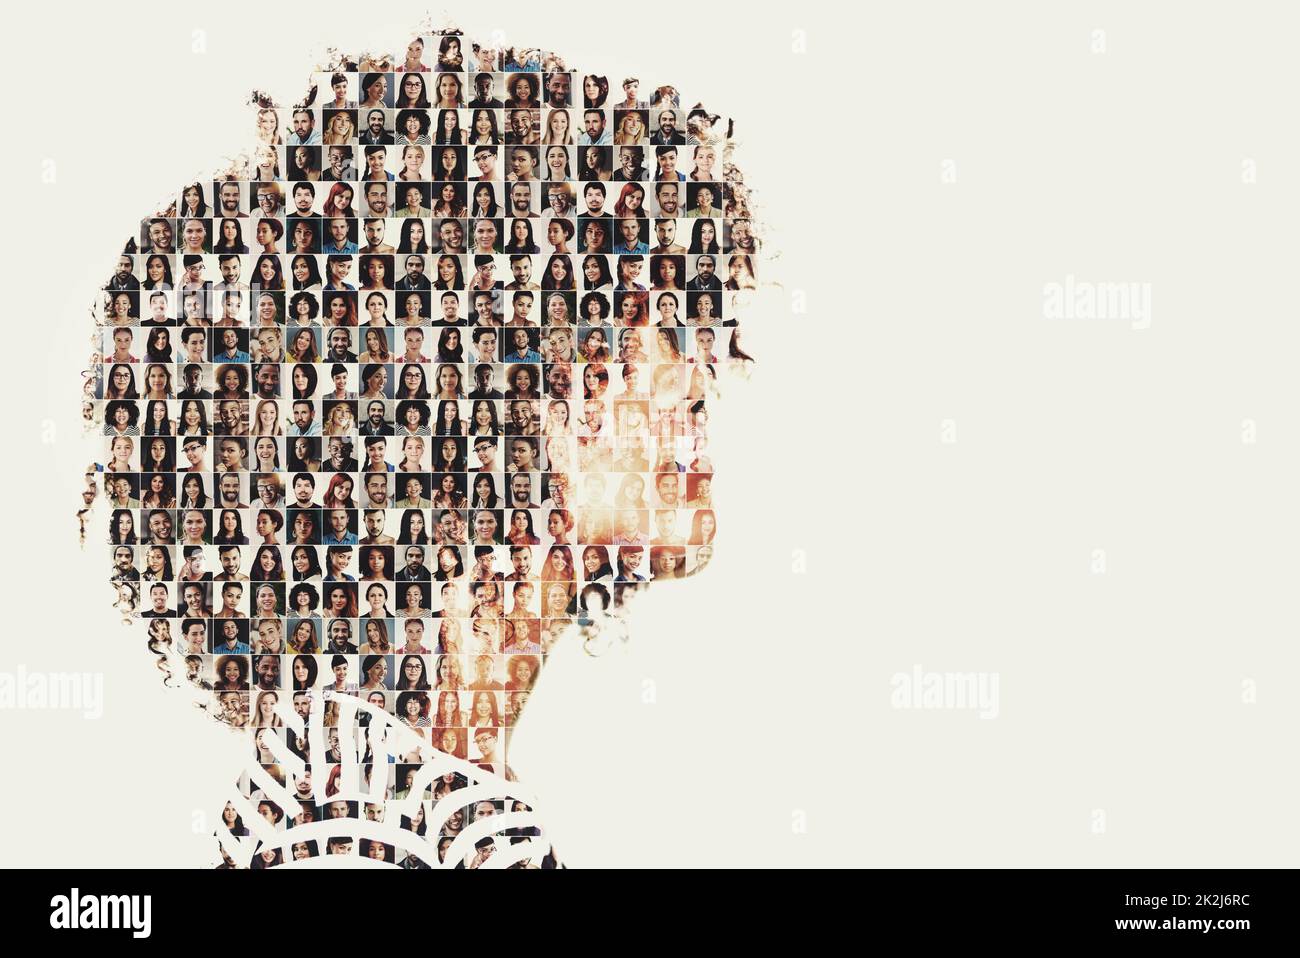 Together we make one. Composite image of a diverse group of people superimposed on a woman's profile. Stock Photo